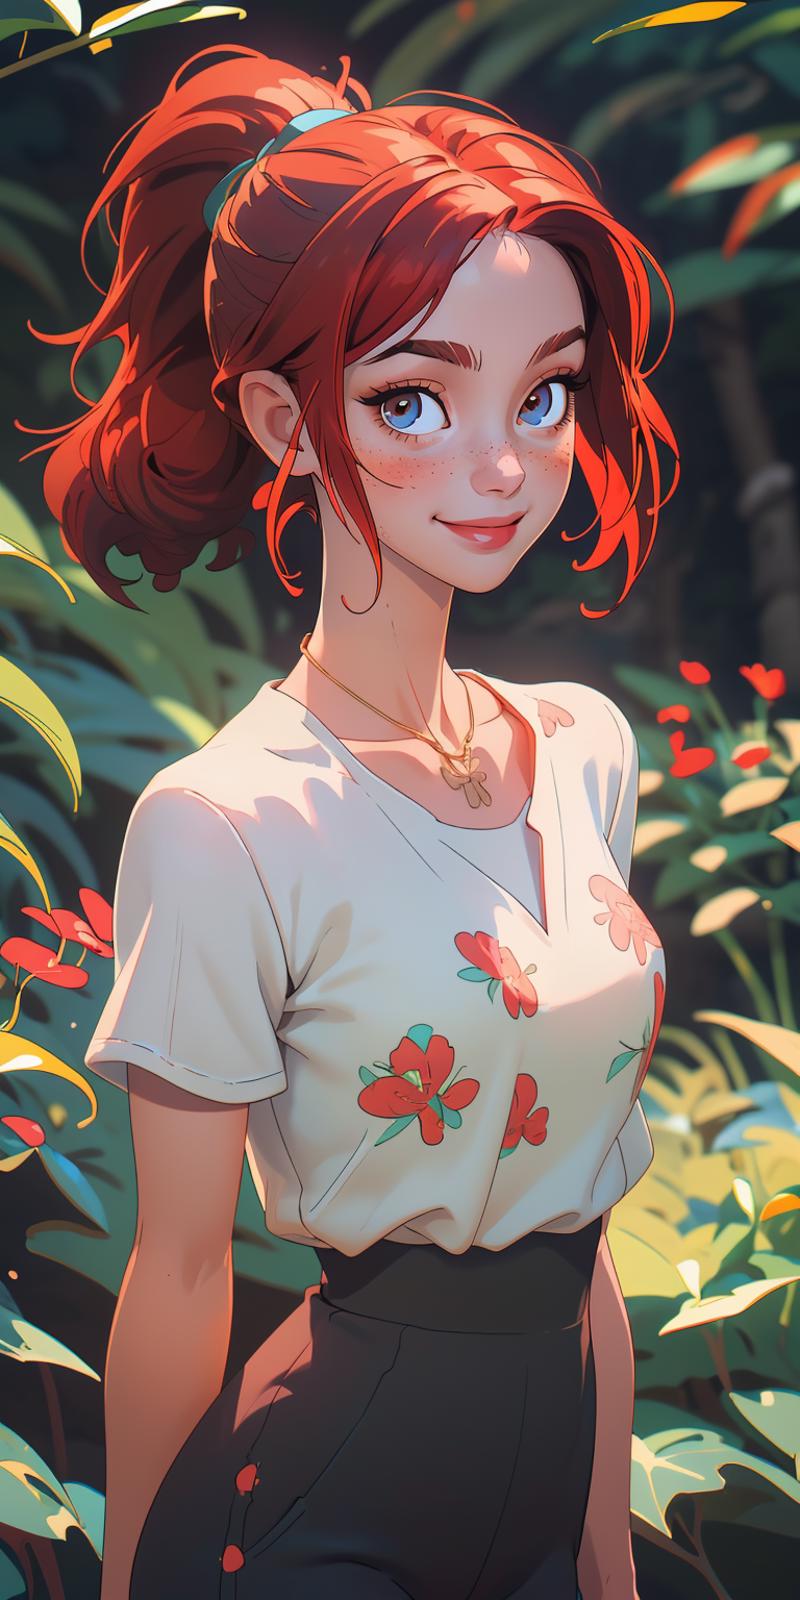 A cartoon illustration of a girl with red hair and blue eyes, wearing a white floral shirt, smiling while posing in a forest setting.